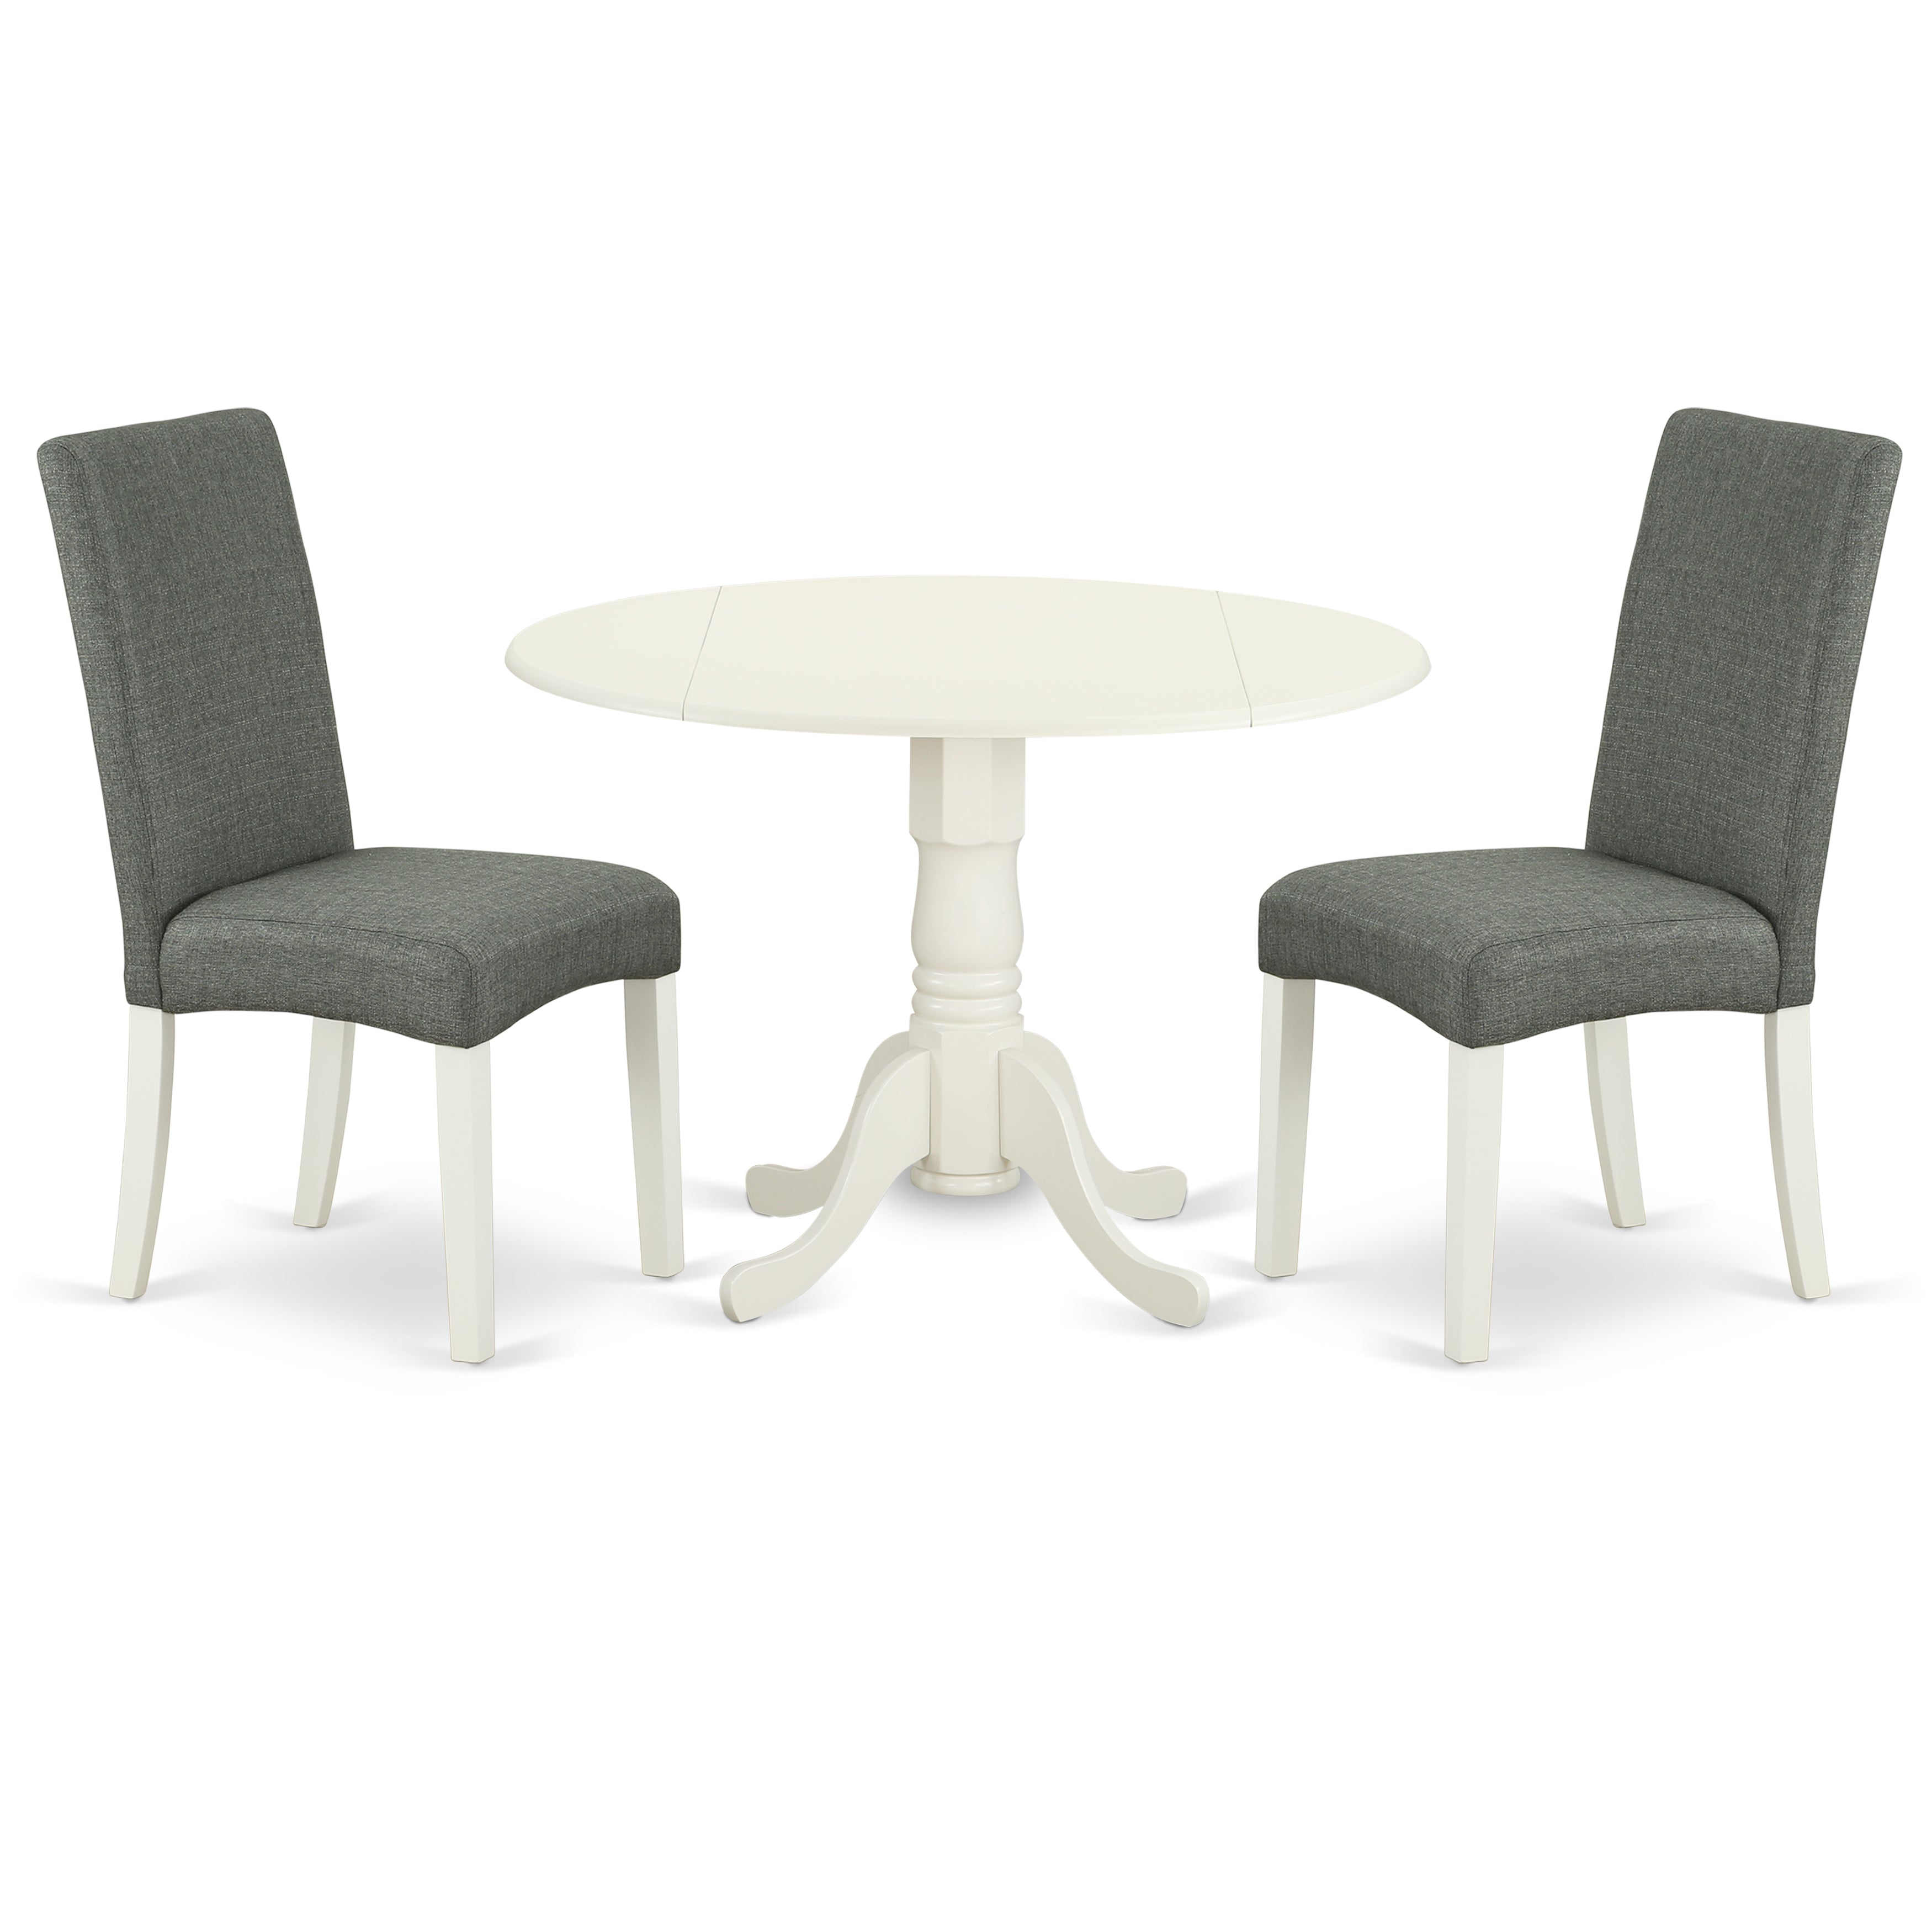 DLDR3-LWH-07 3Pc Round 42 Inch Dining Table With Two 9-Inch Drop Leaves And Two Parson Chair With Linen White Finish Leg And Linen Fabric- Gray Color